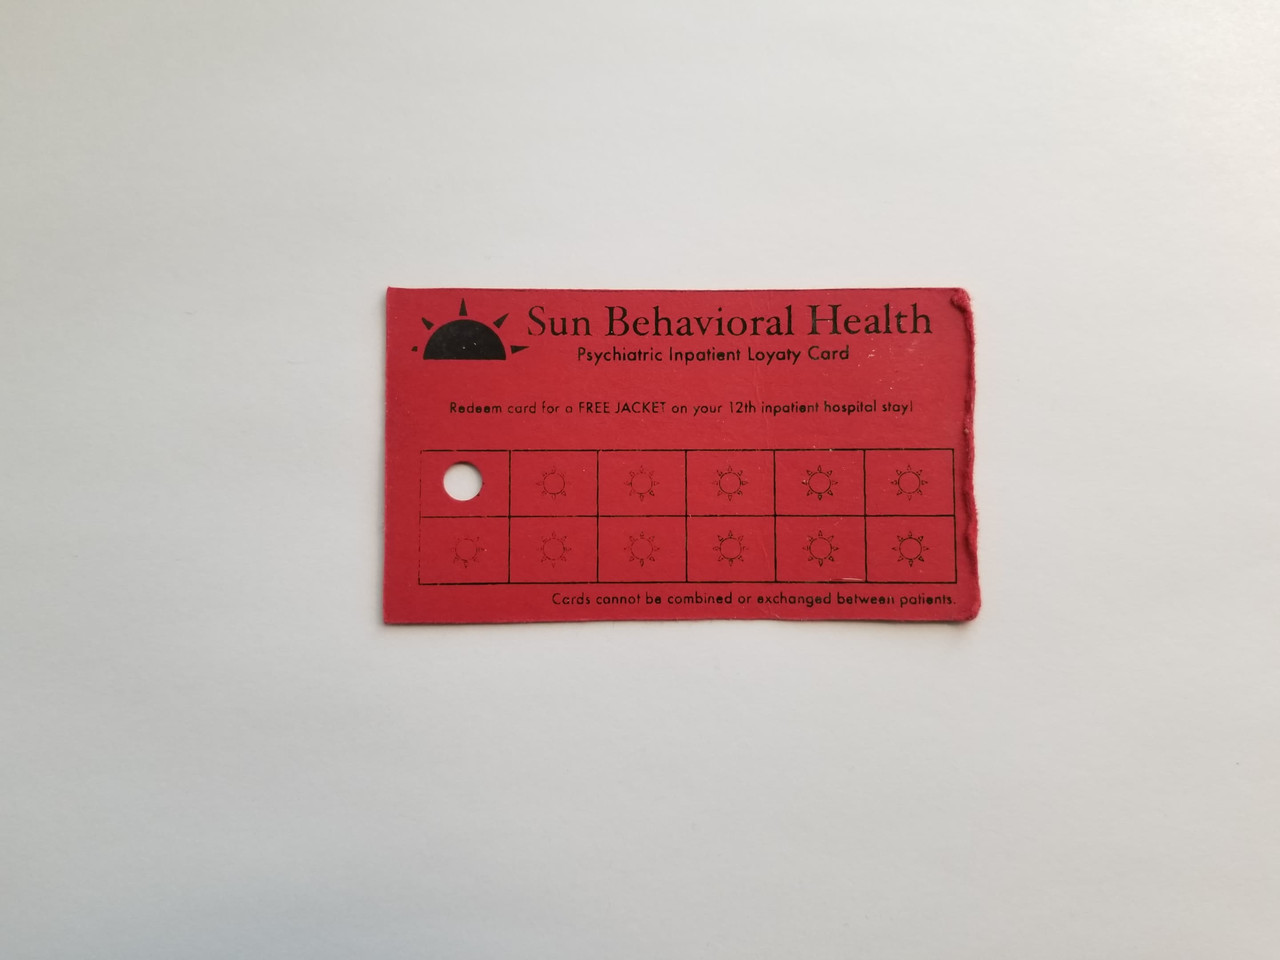 screen printed card referencing a customer loyalty points card but for a psychiatric facility 